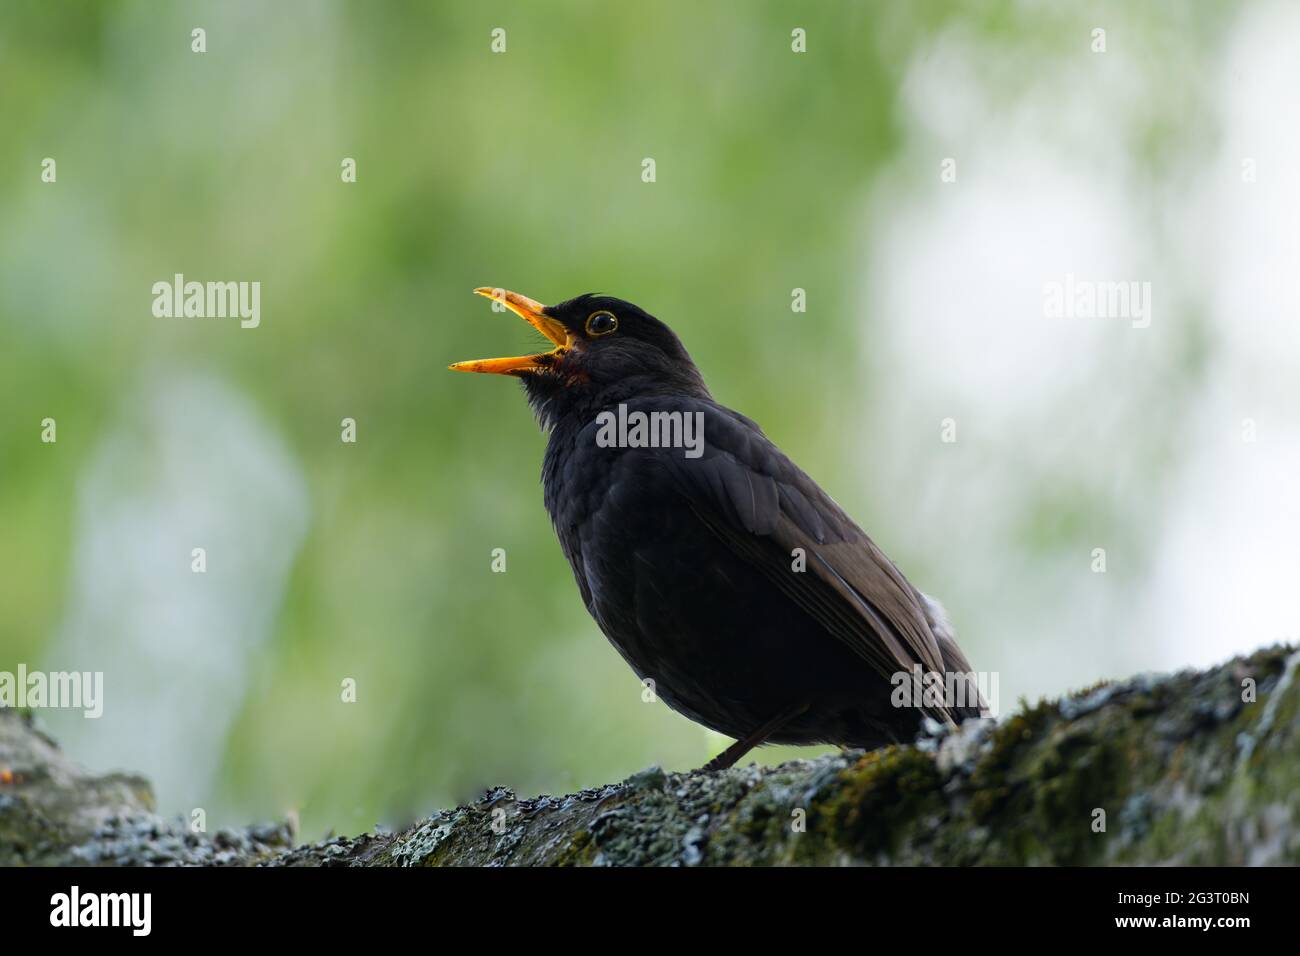 blackbird in profile with beak wide open singing against blurry green background Stock Photo